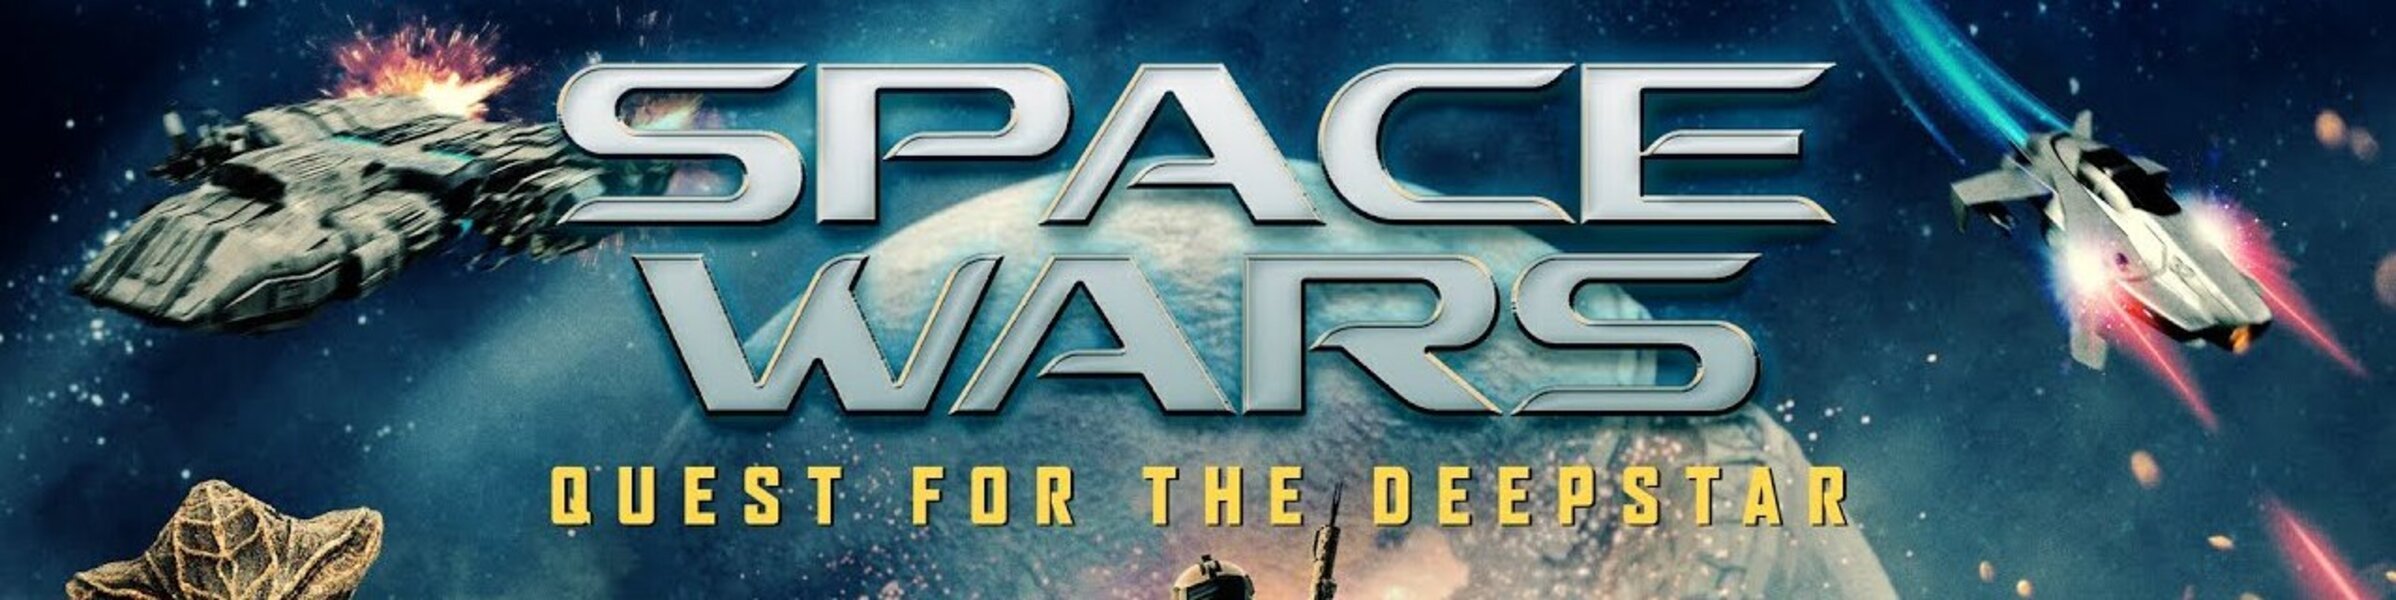 Space Wars: Quest for the Deepstar streaming